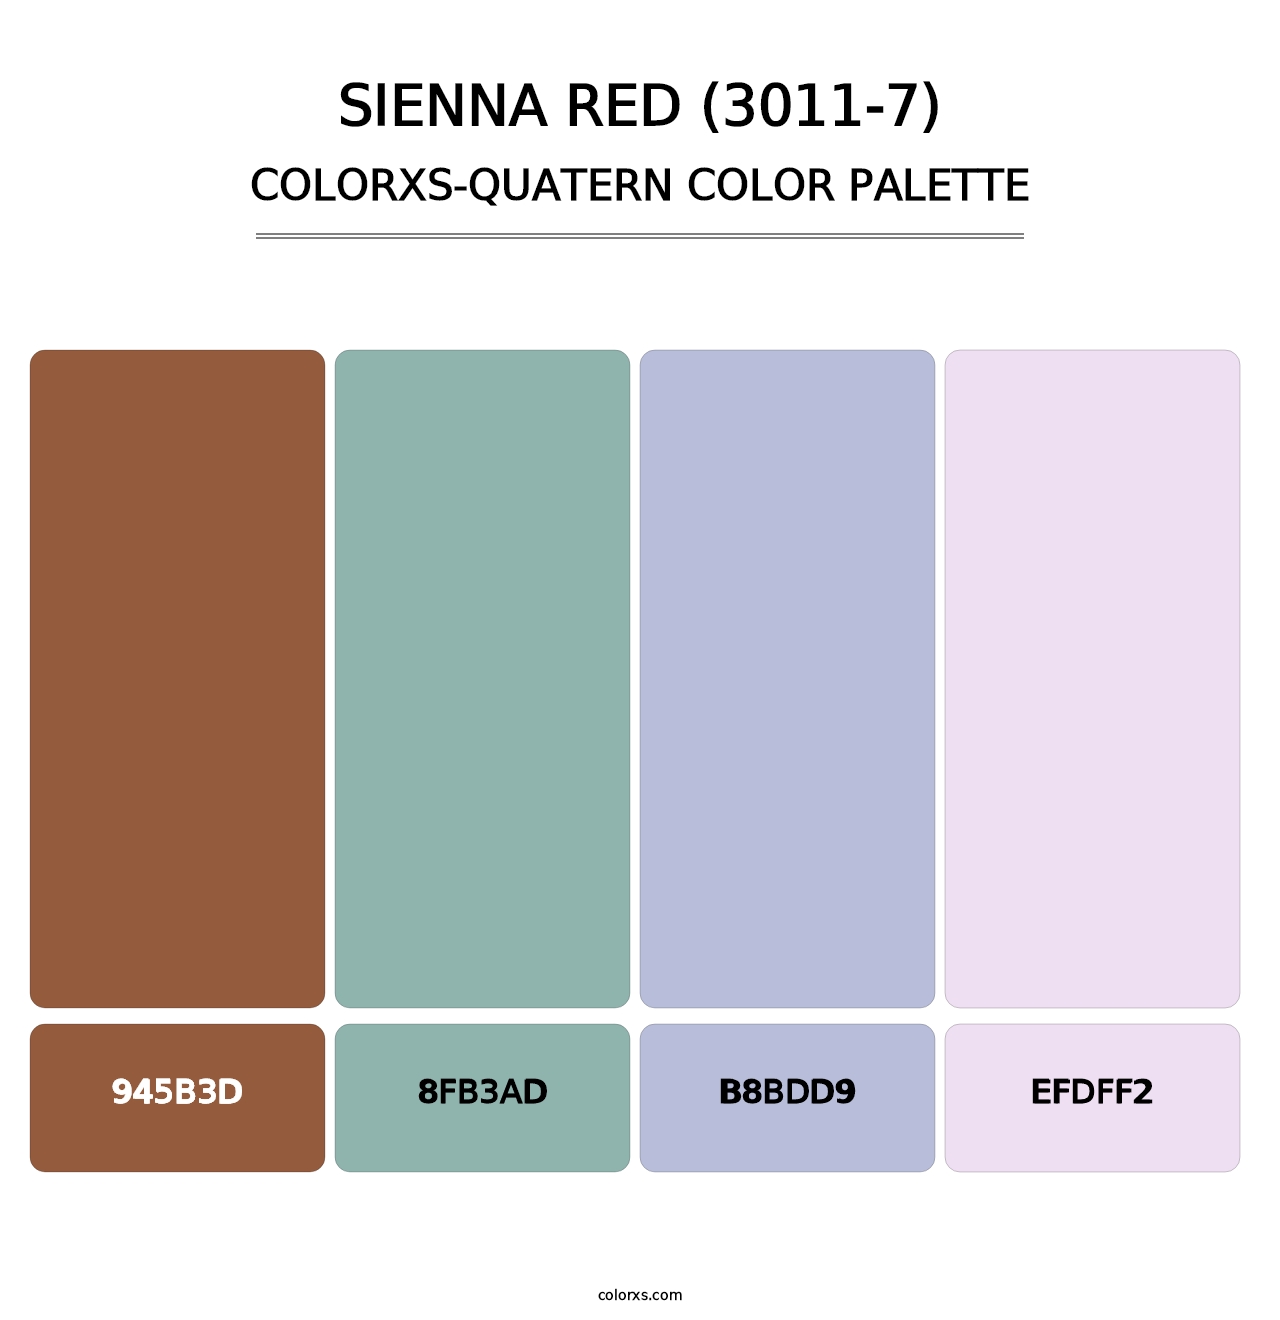 Sienna Red (3011-7) - Colorxs Quatern Palette